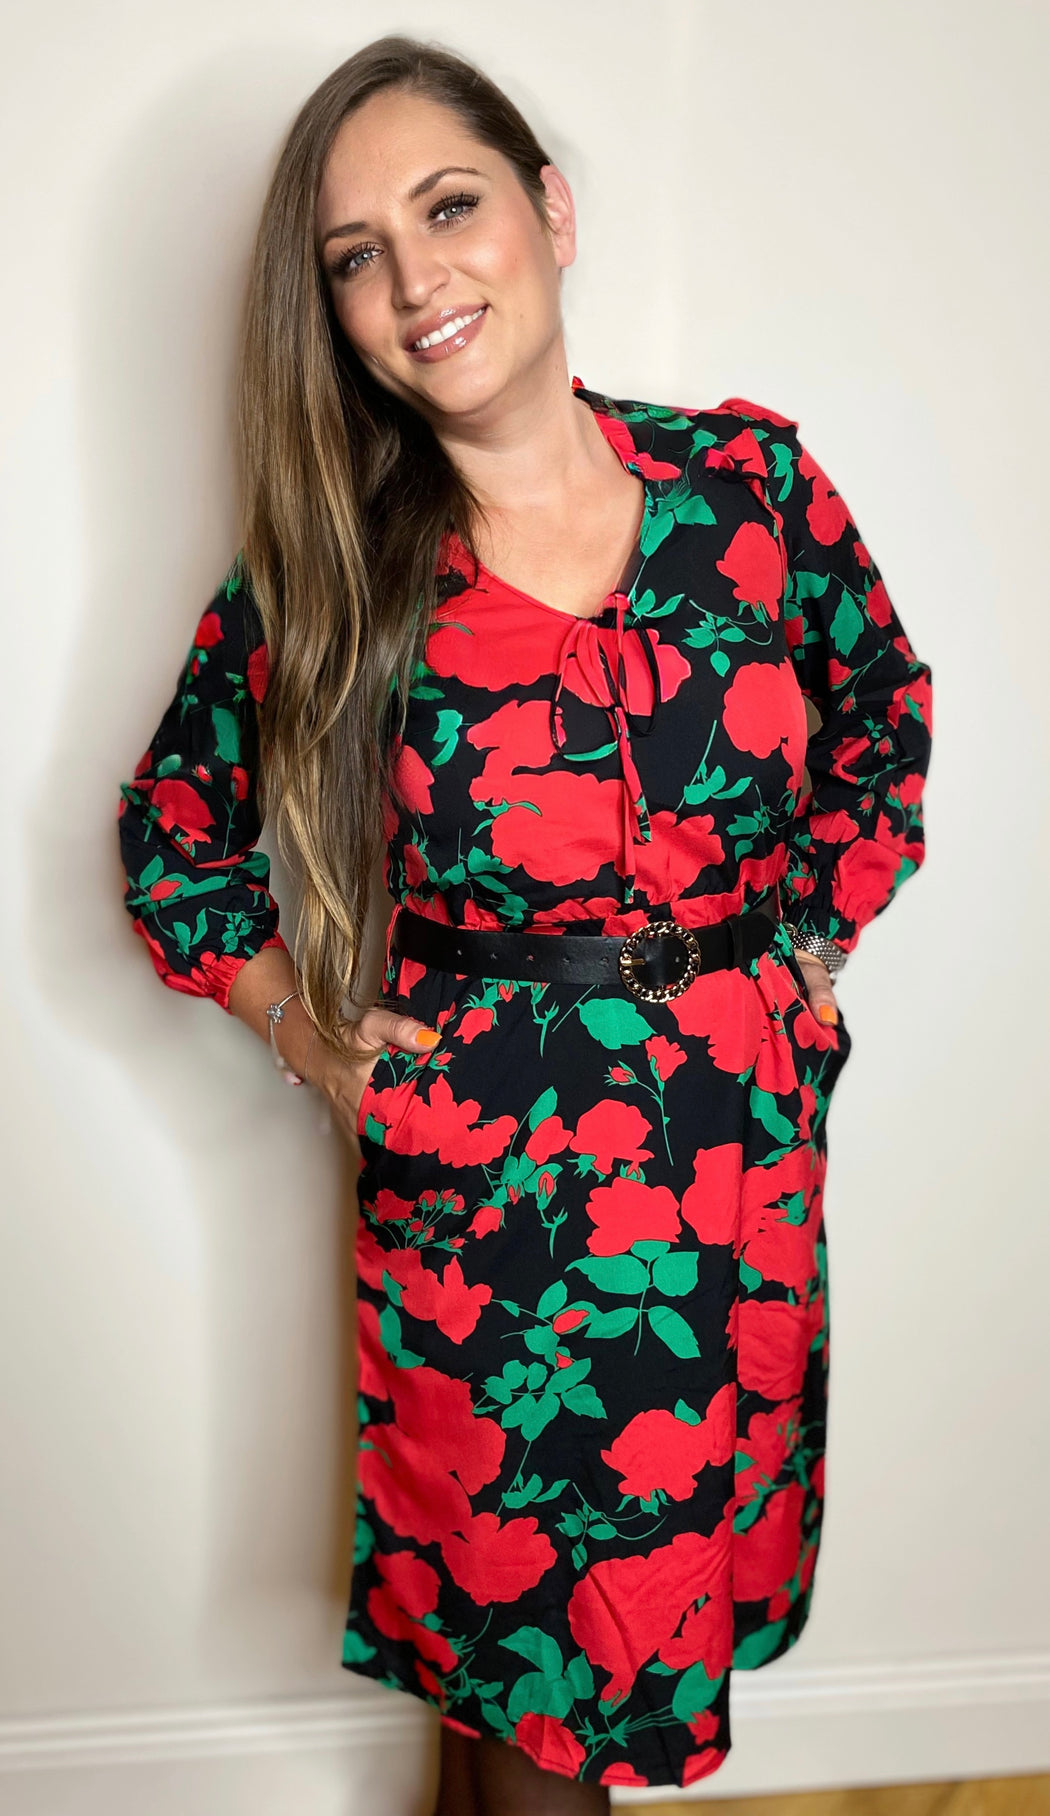 Andrea red floral dress